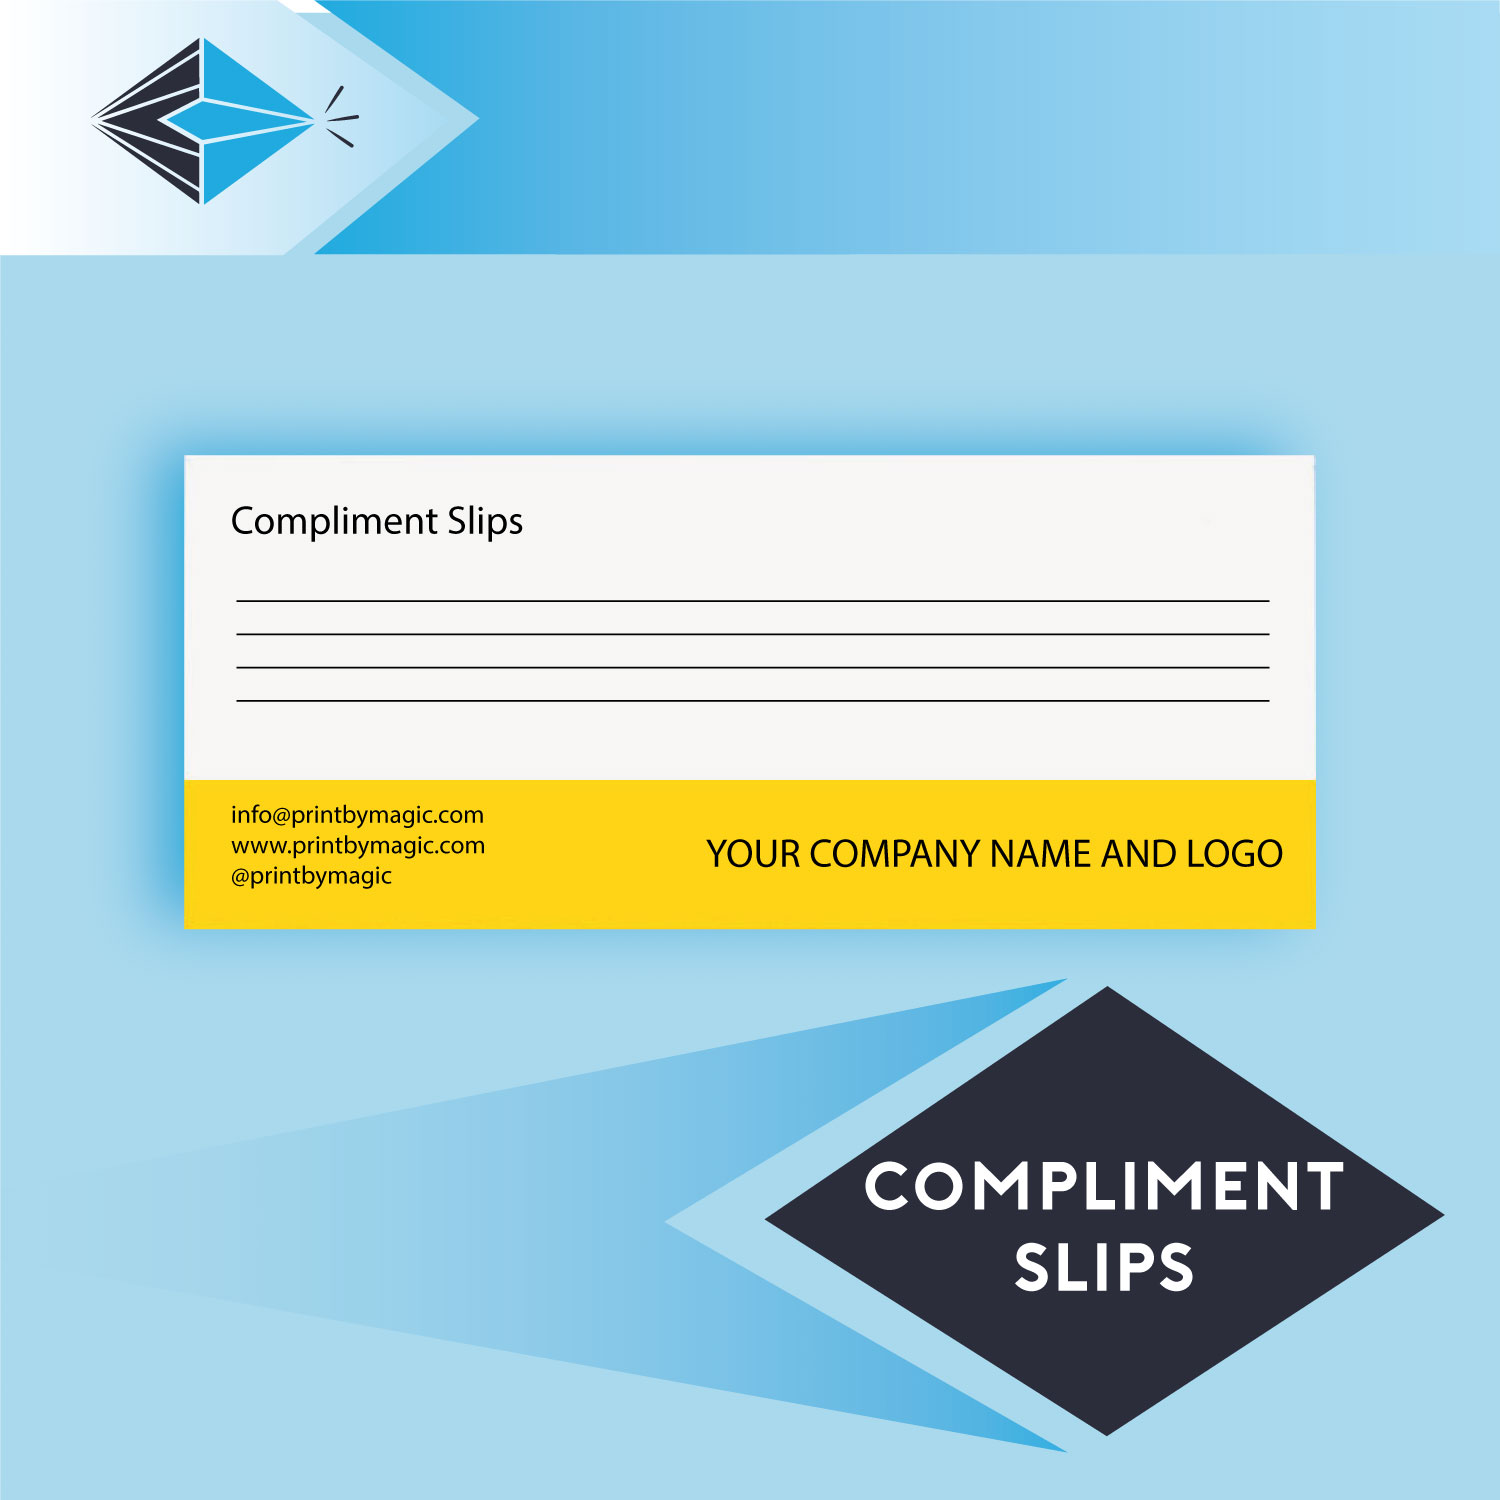 compliment slips compliment slip printing office printing stockport manchester uk